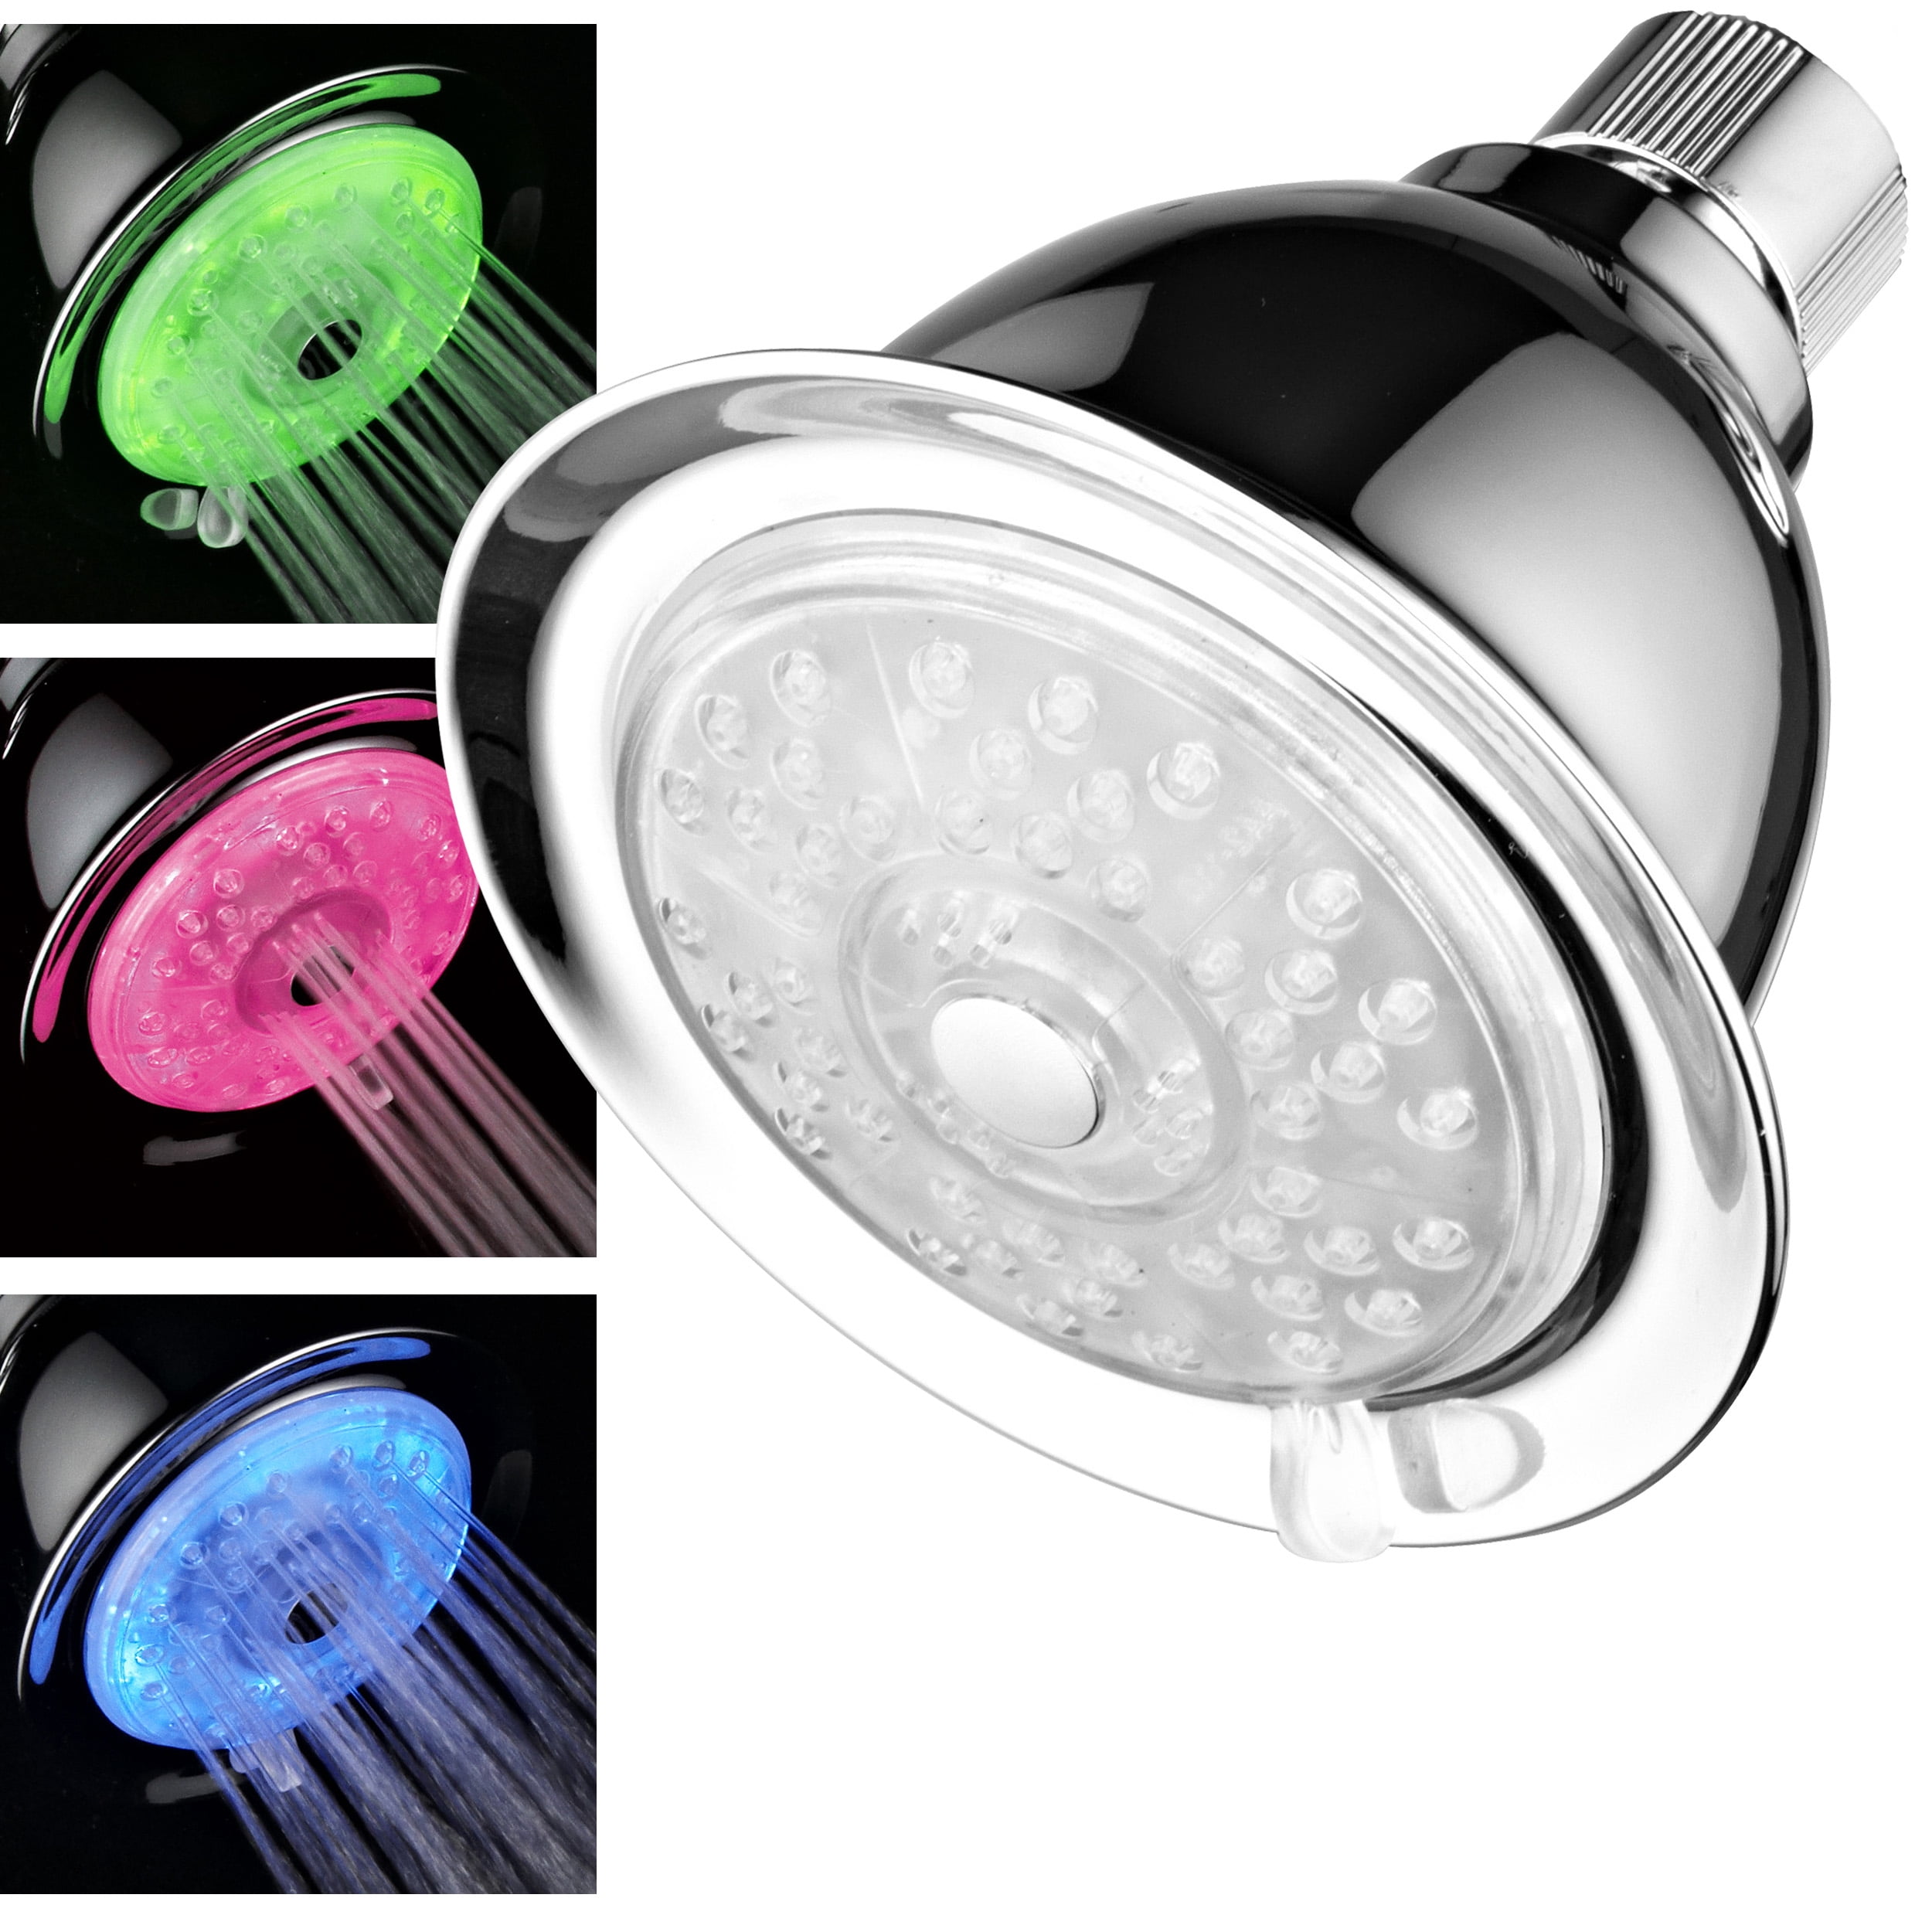 50 X LED Shower Water Light Colorful Head Bathroom 3 Colors Temperature ey 